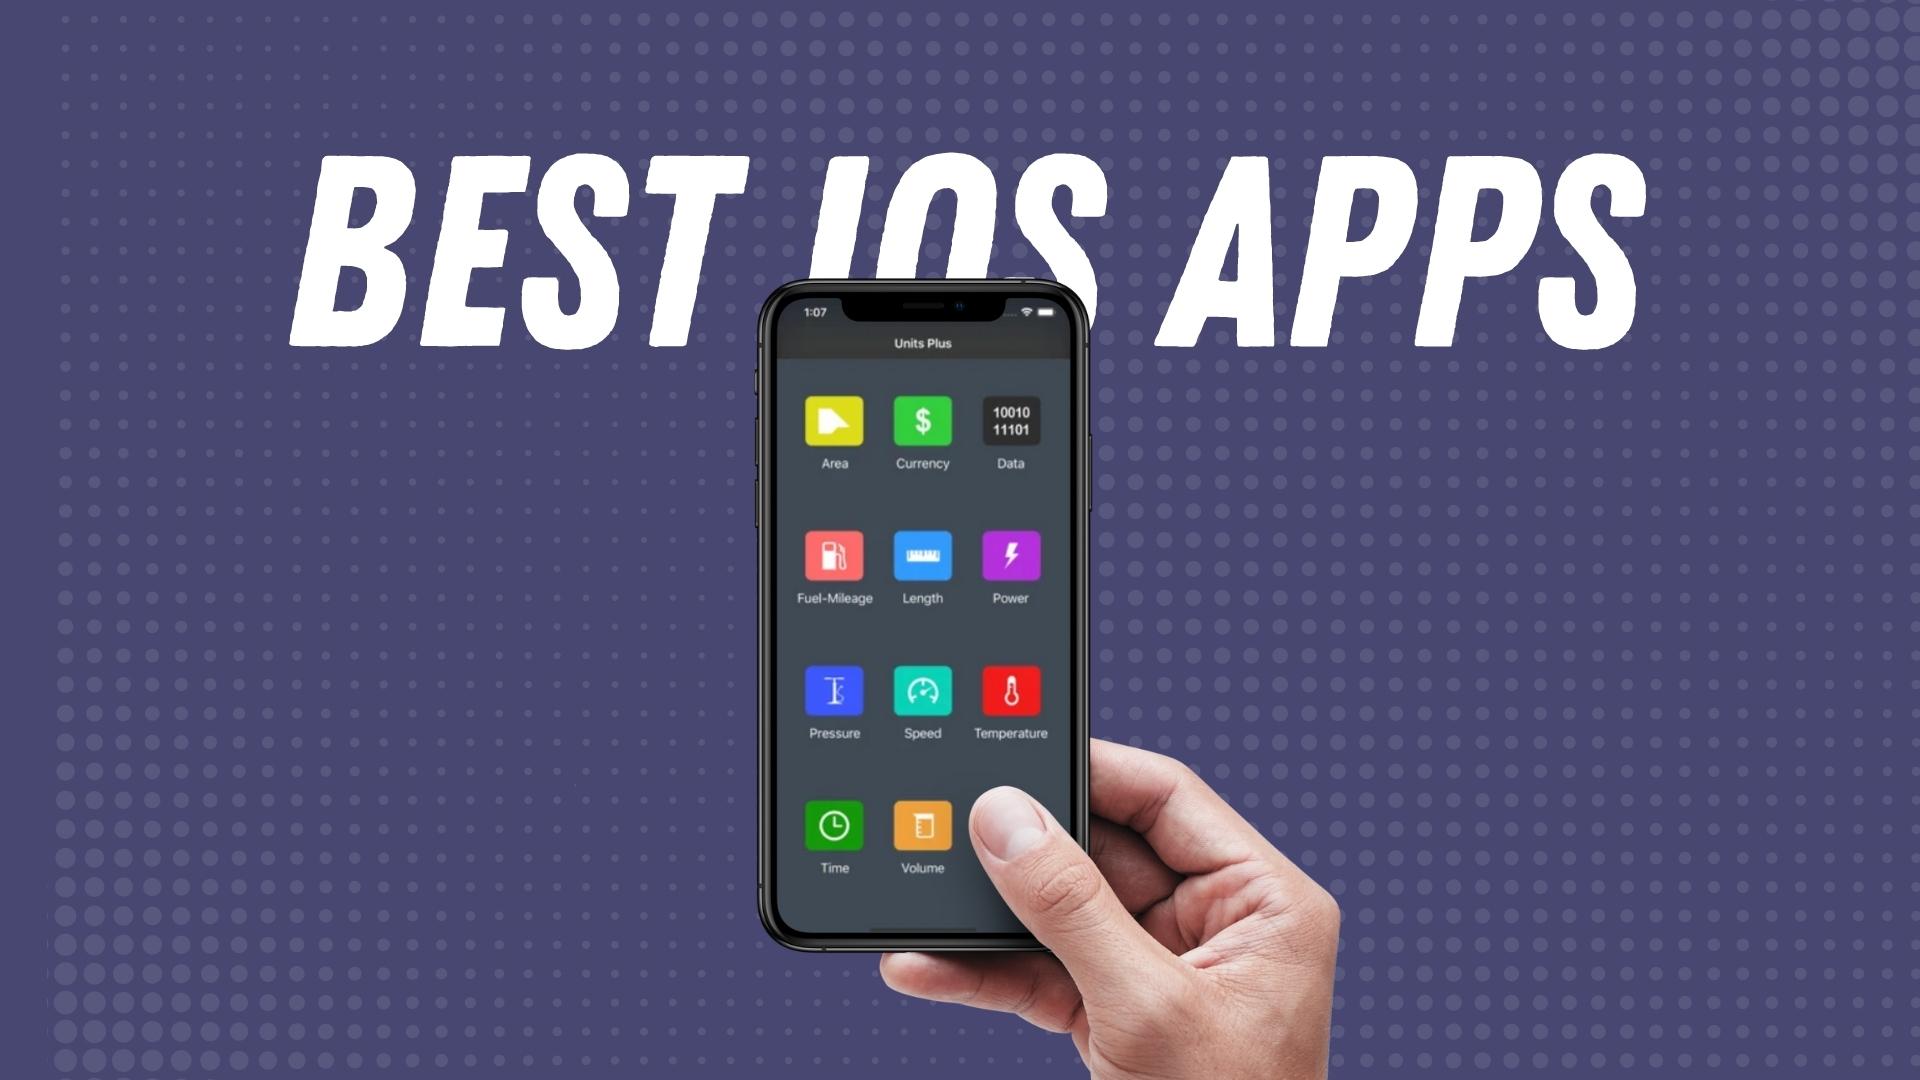 Top 10 Best iOS Apps January 2022